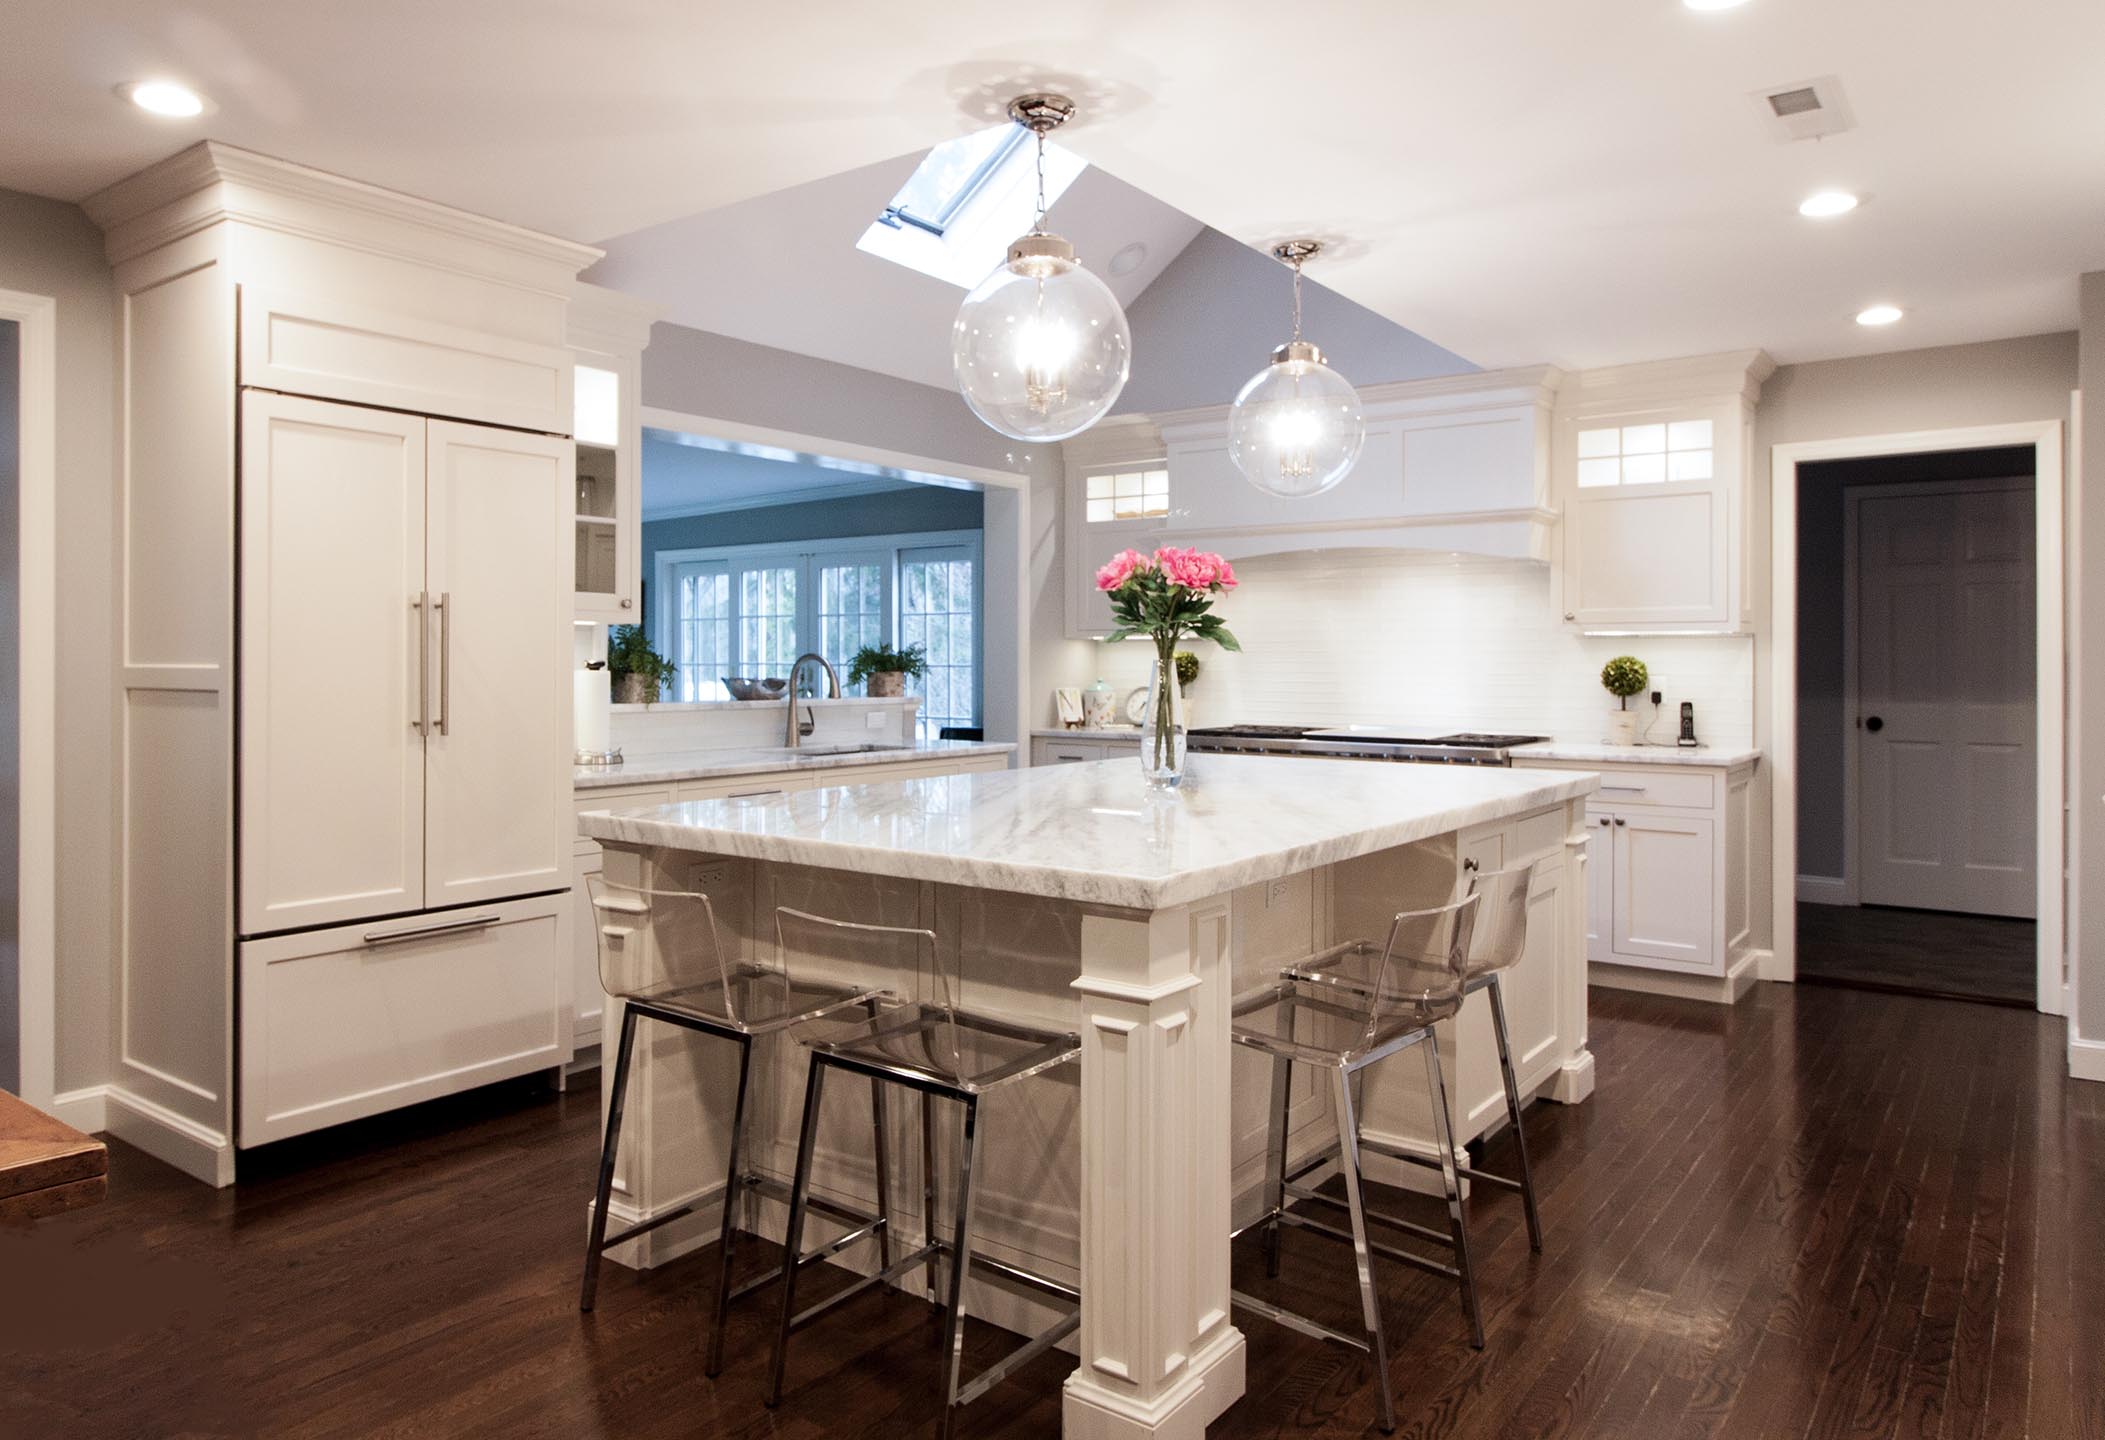 classic kitchen counter seating by Joan Bigg kitchen design lawrence farms westchester ny